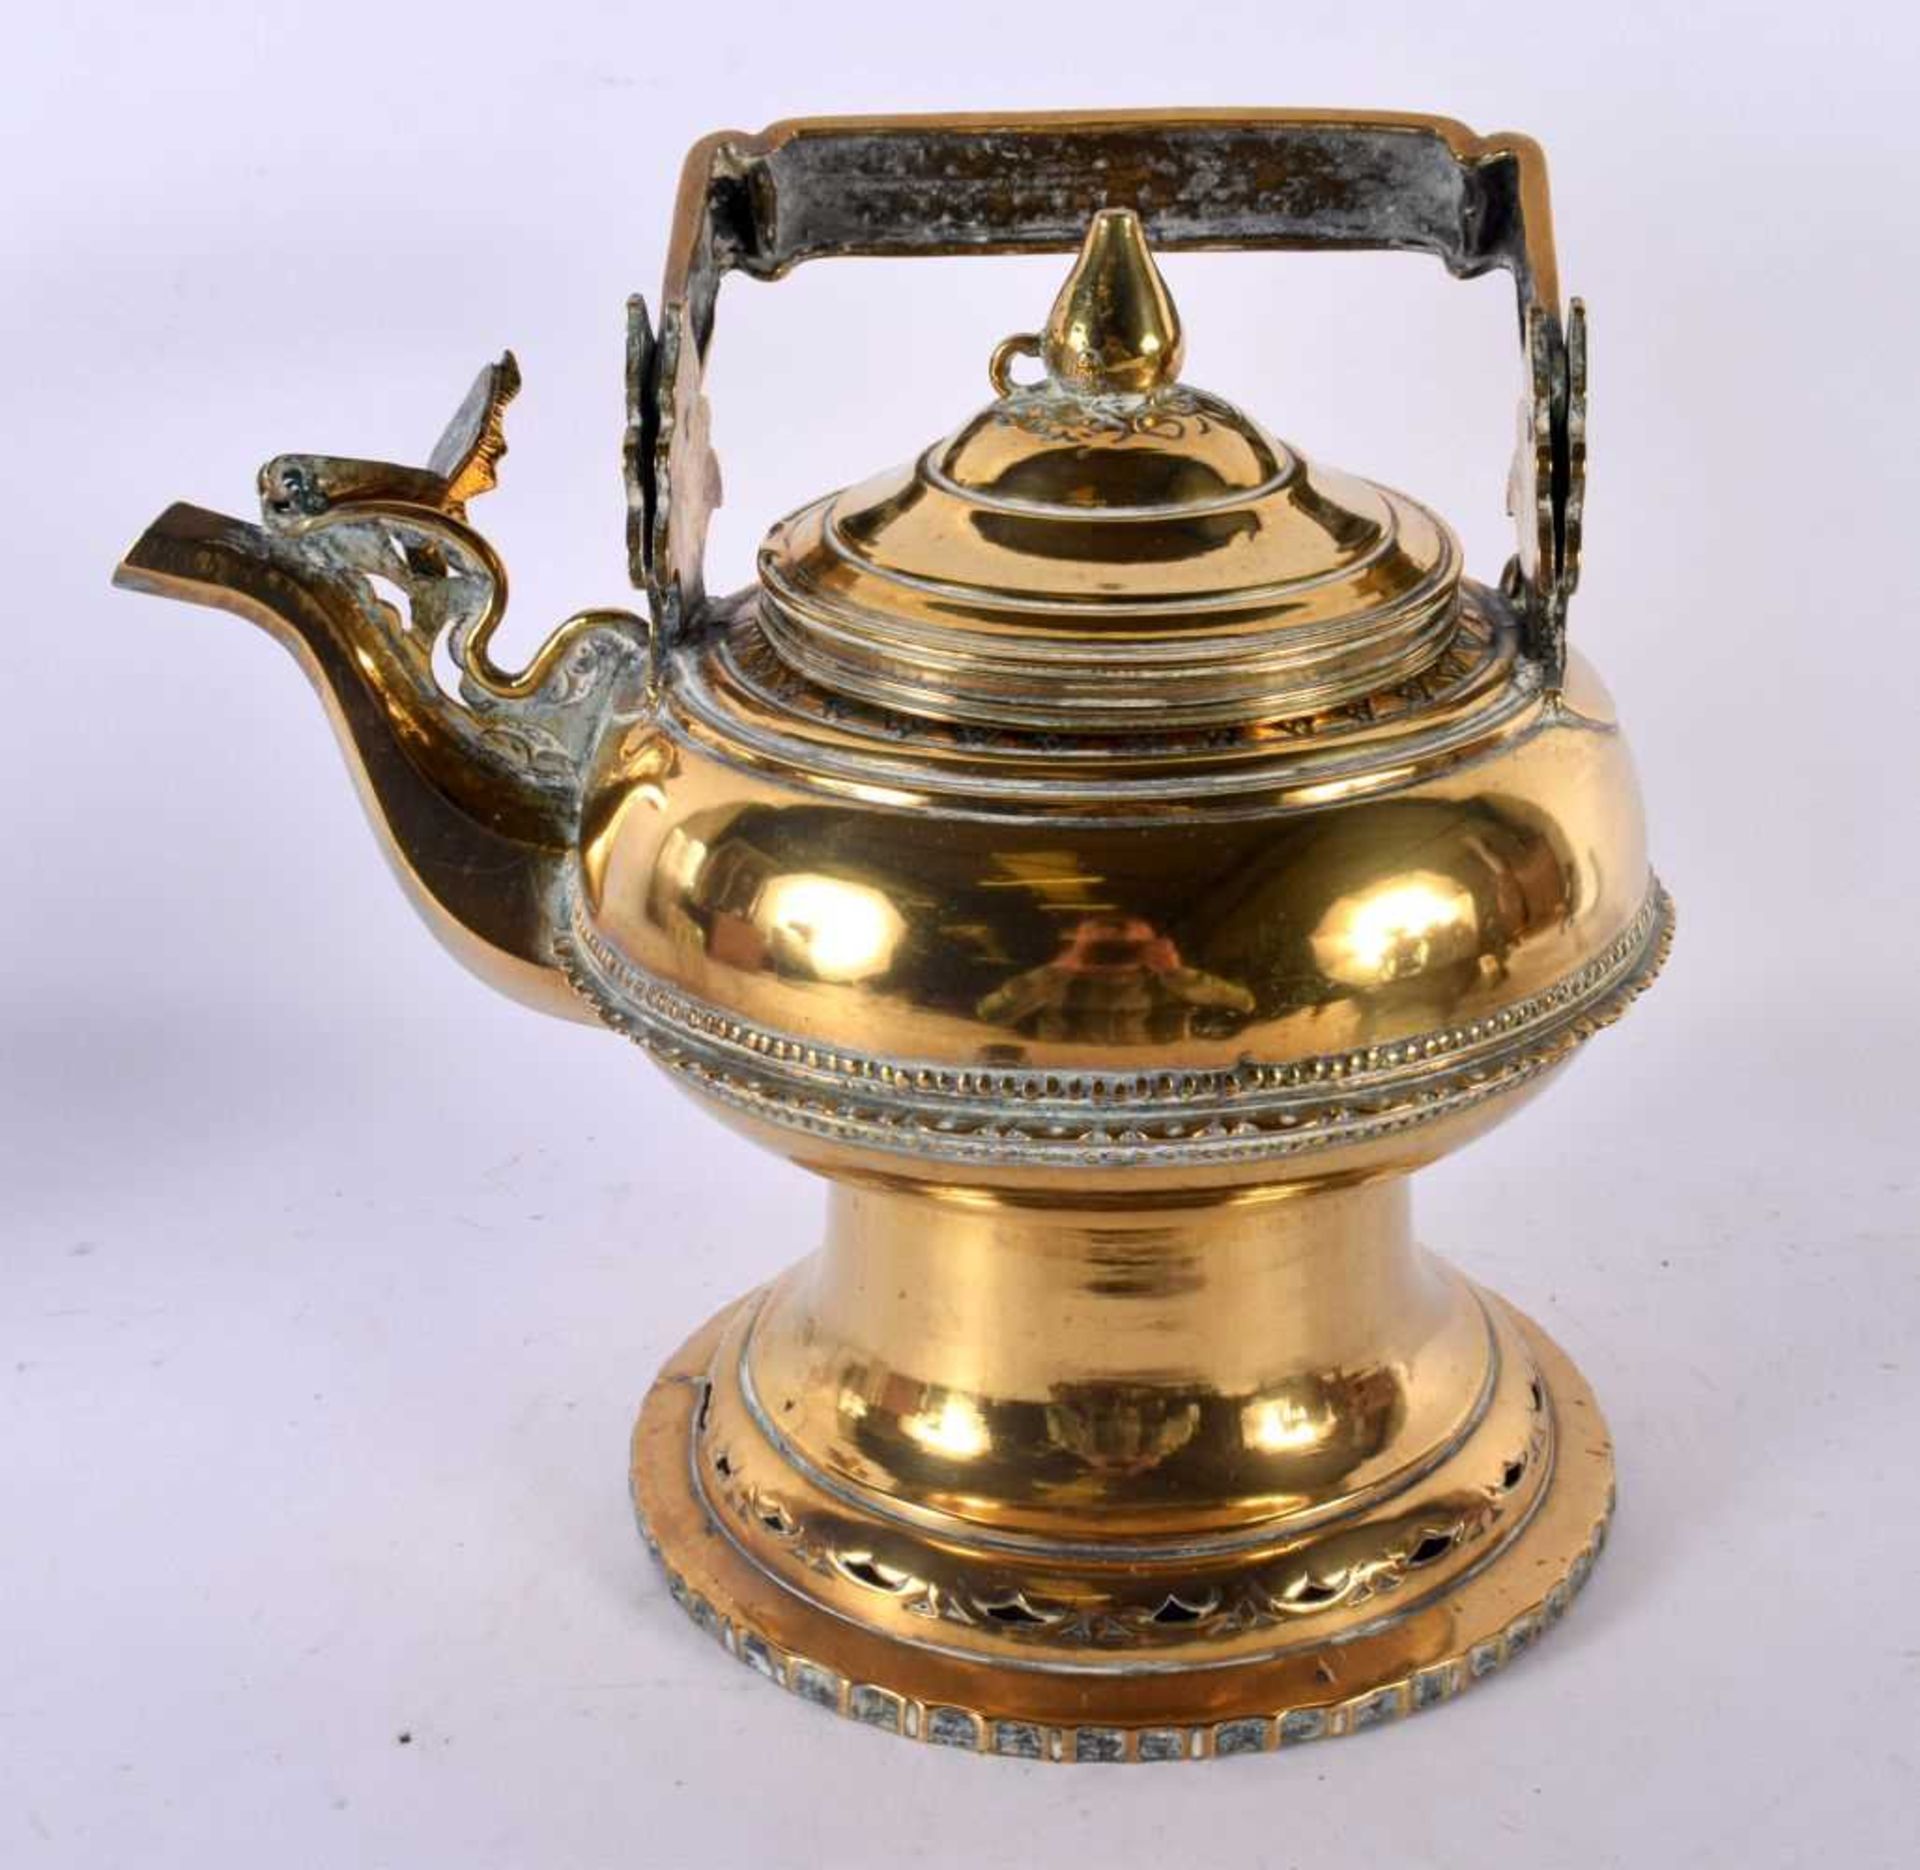 A TURKISH MOTHER OF PEARL INLAID PISTOL together with a Middle Eastern bronze teapot and cover. - Image 3 of 5